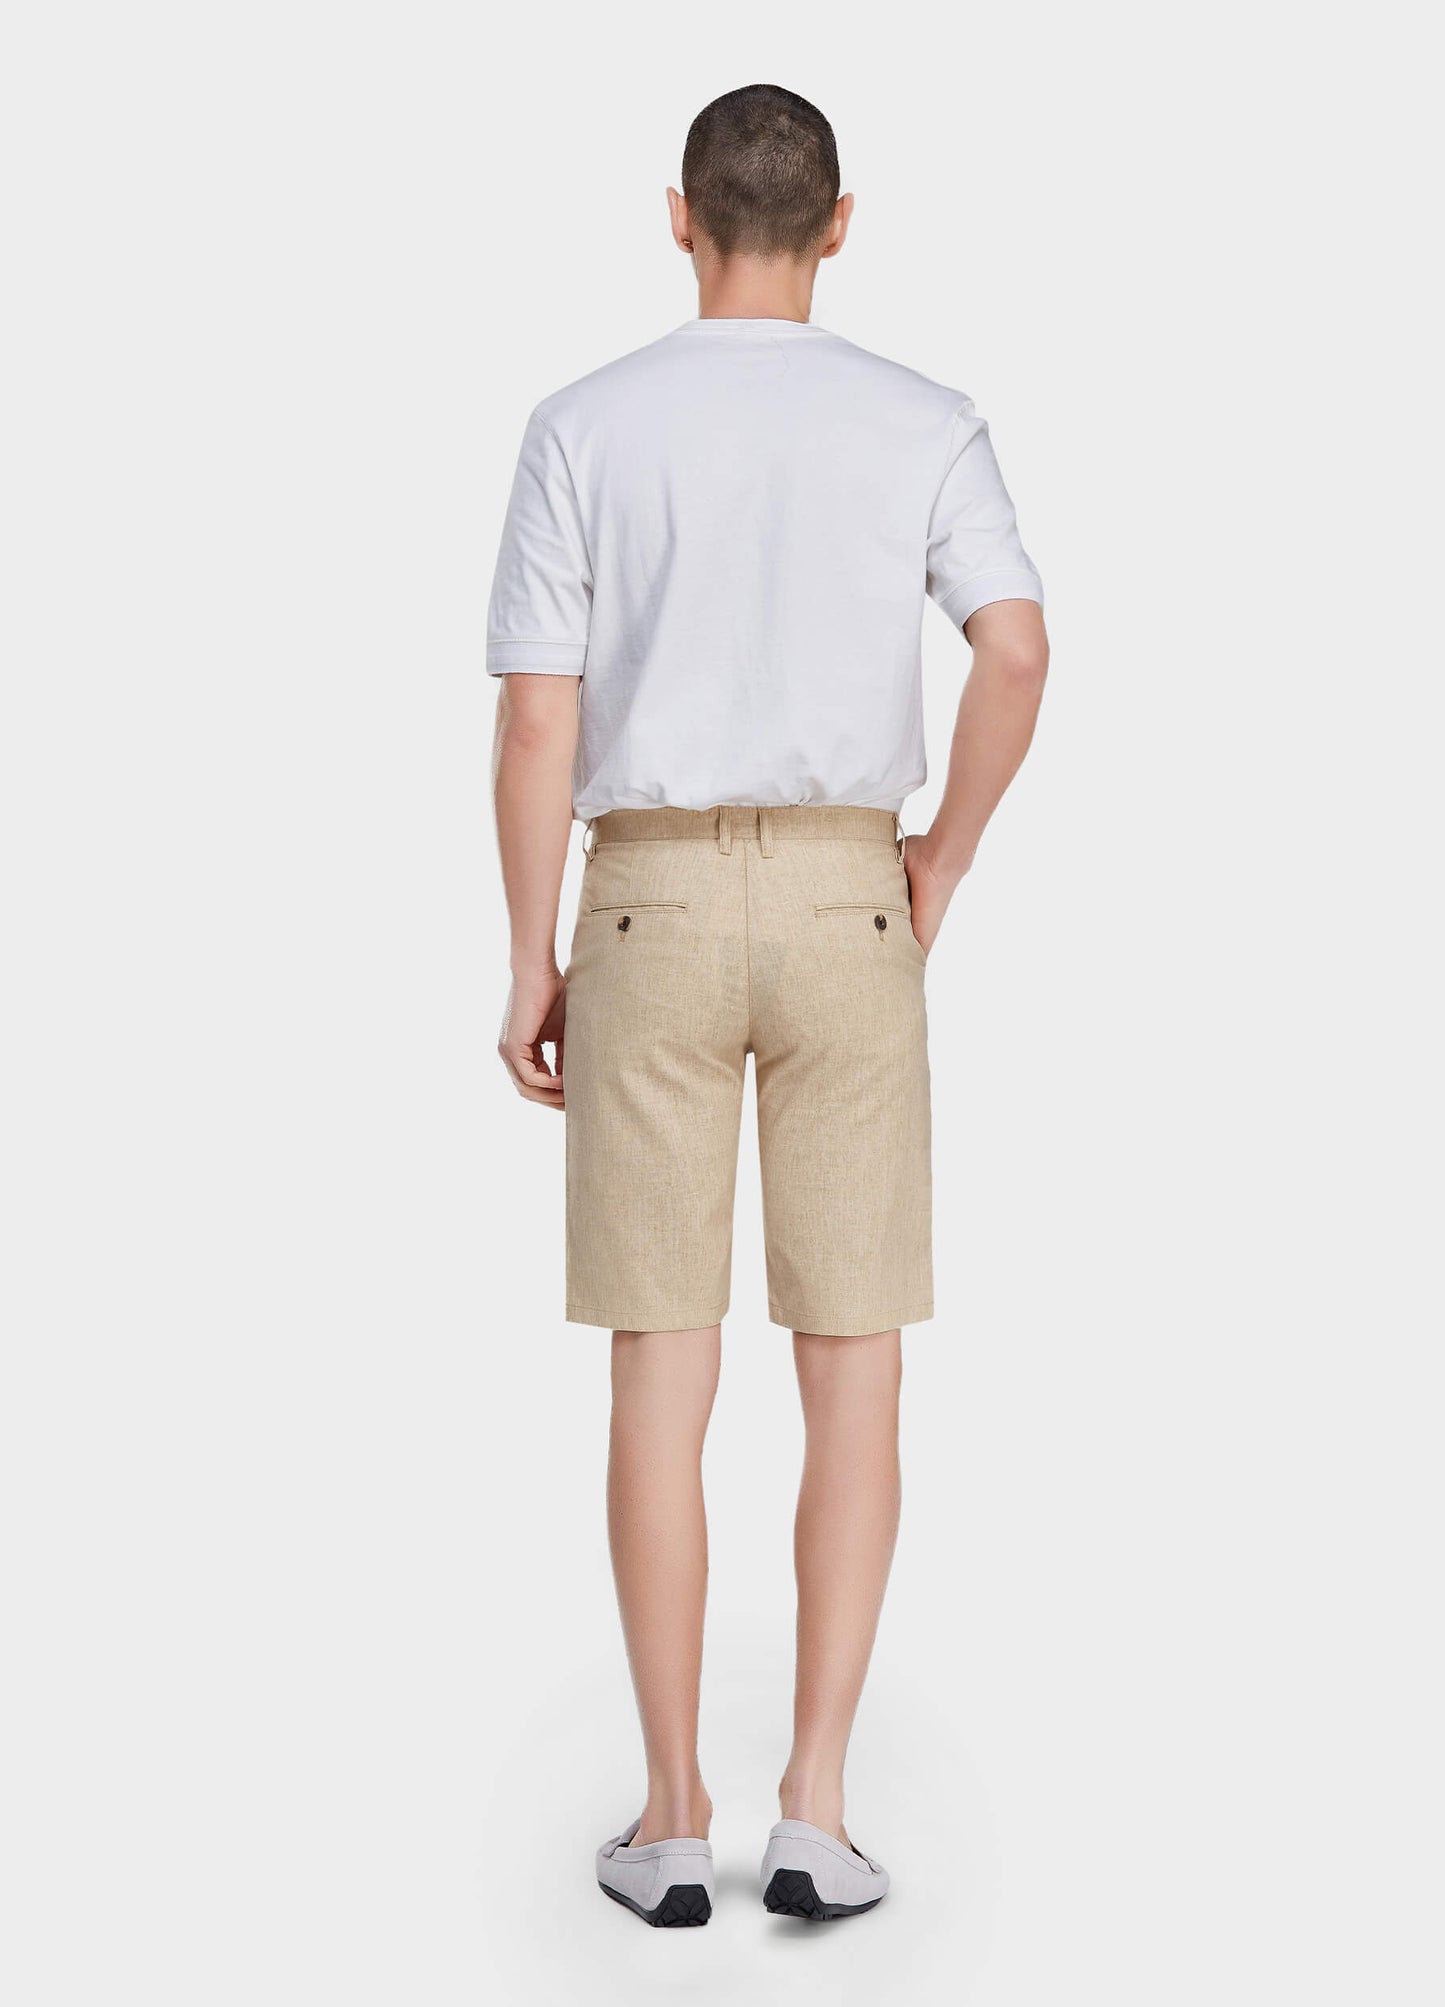 Men's Casual Solid Zipper Fly Button Walk Shorts with Slant Pockets-Beige back view